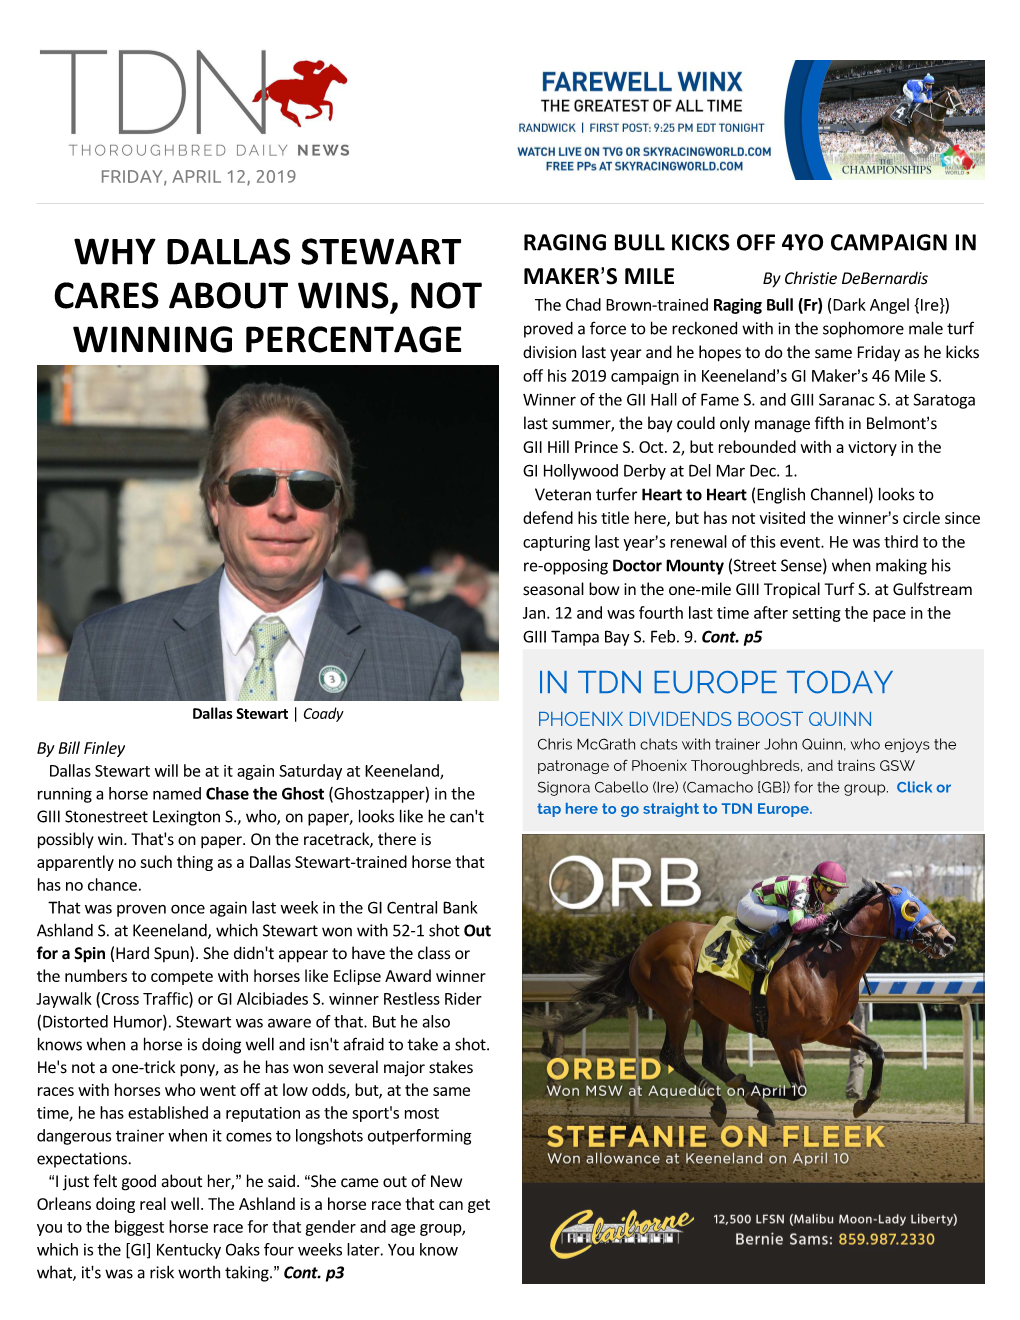 Why Dallas Stewart Cares About Wins, Not Winning